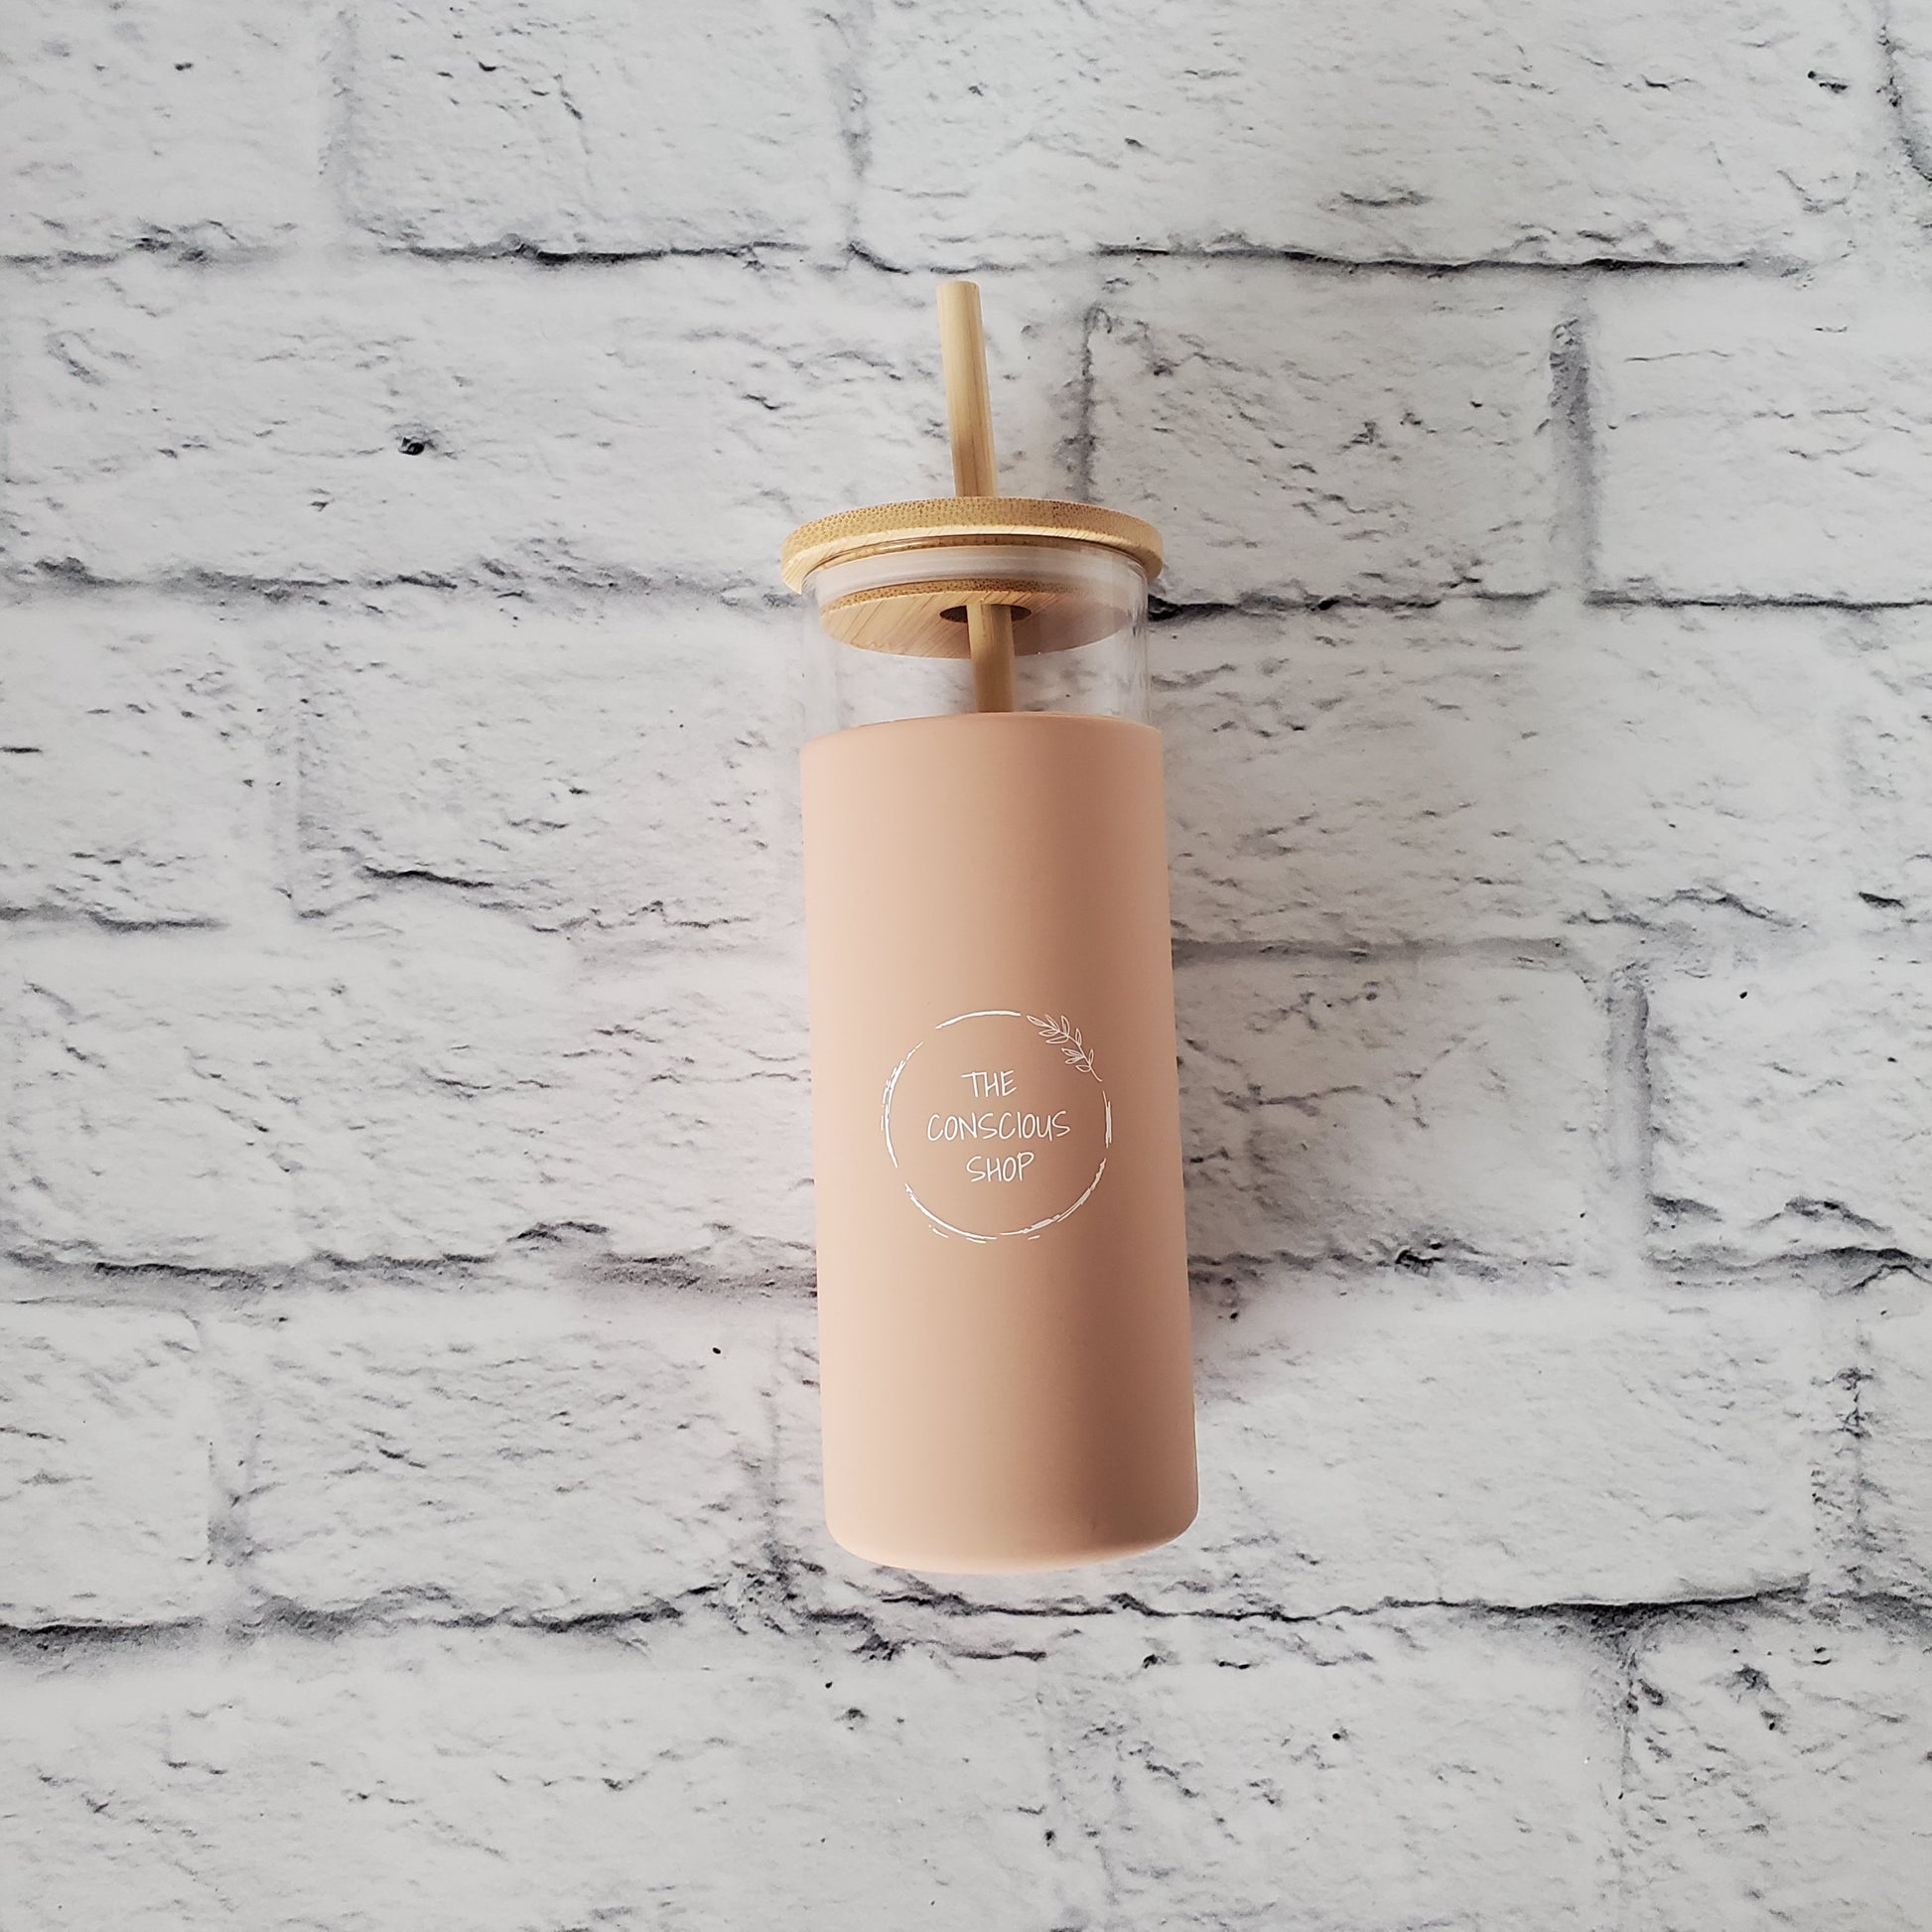 Grow with The Flow Glass Water Bottle with Bamboo Lid